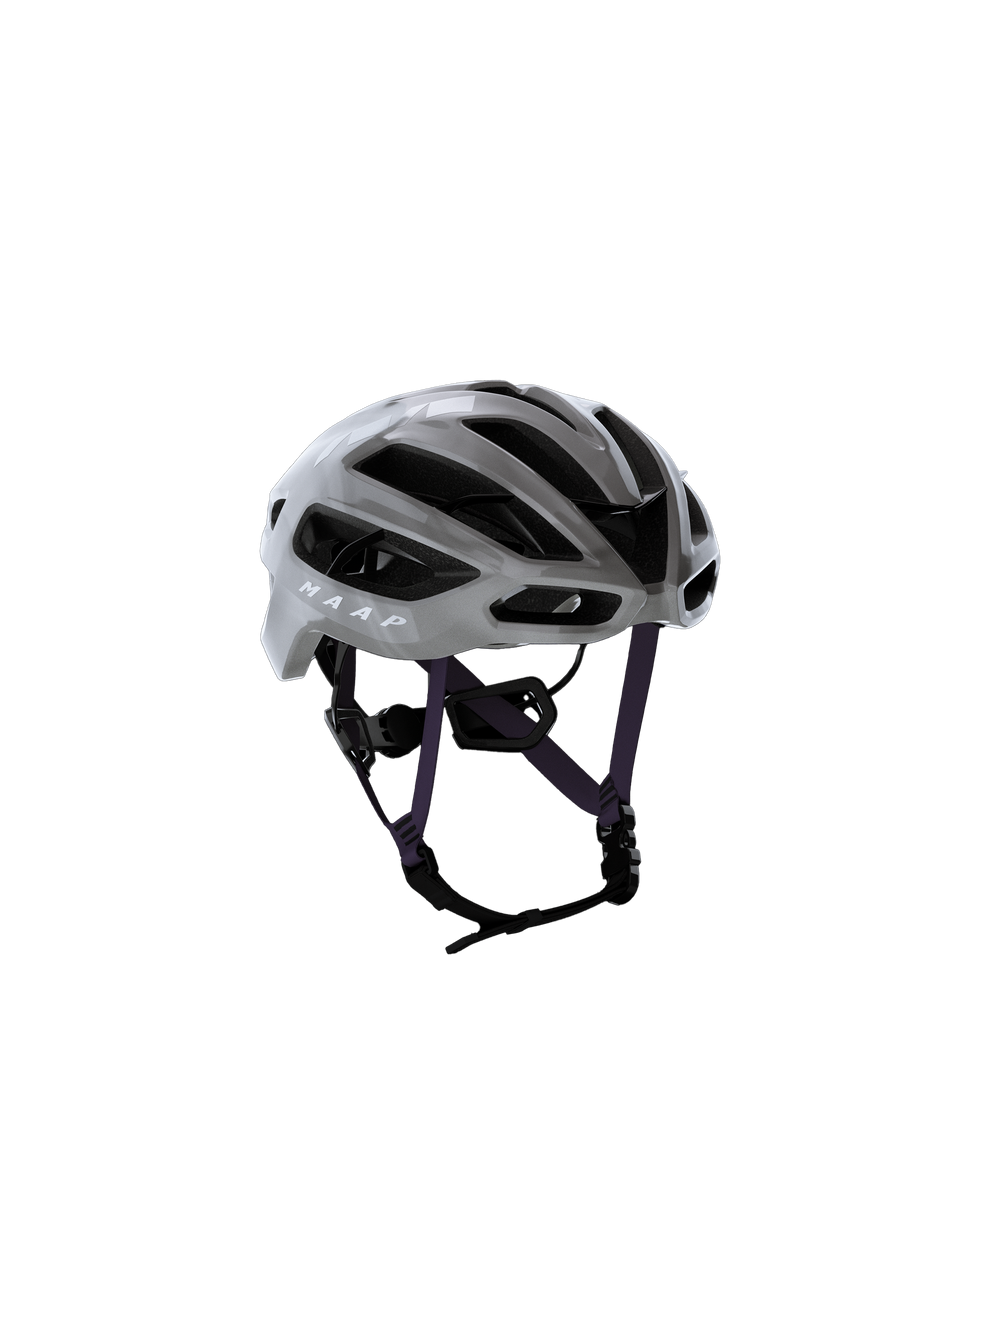 Product Image for MAAP x KASK Protone Icon AS/NZS